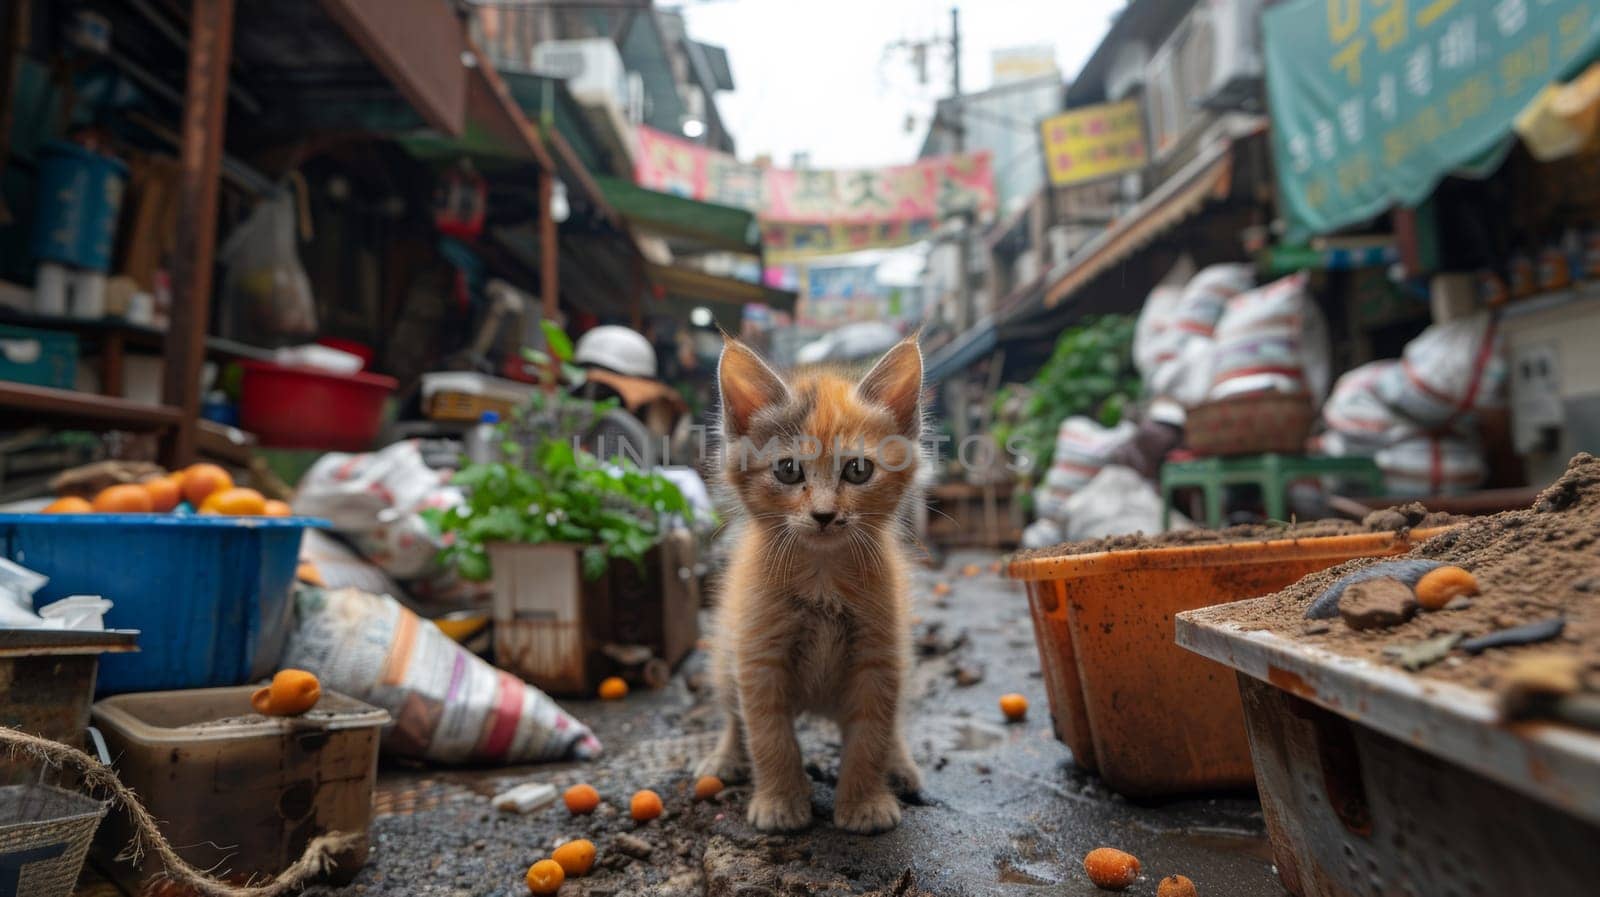 A small kitten standing in a dirty alley with fruit and vegetables, AI by starush